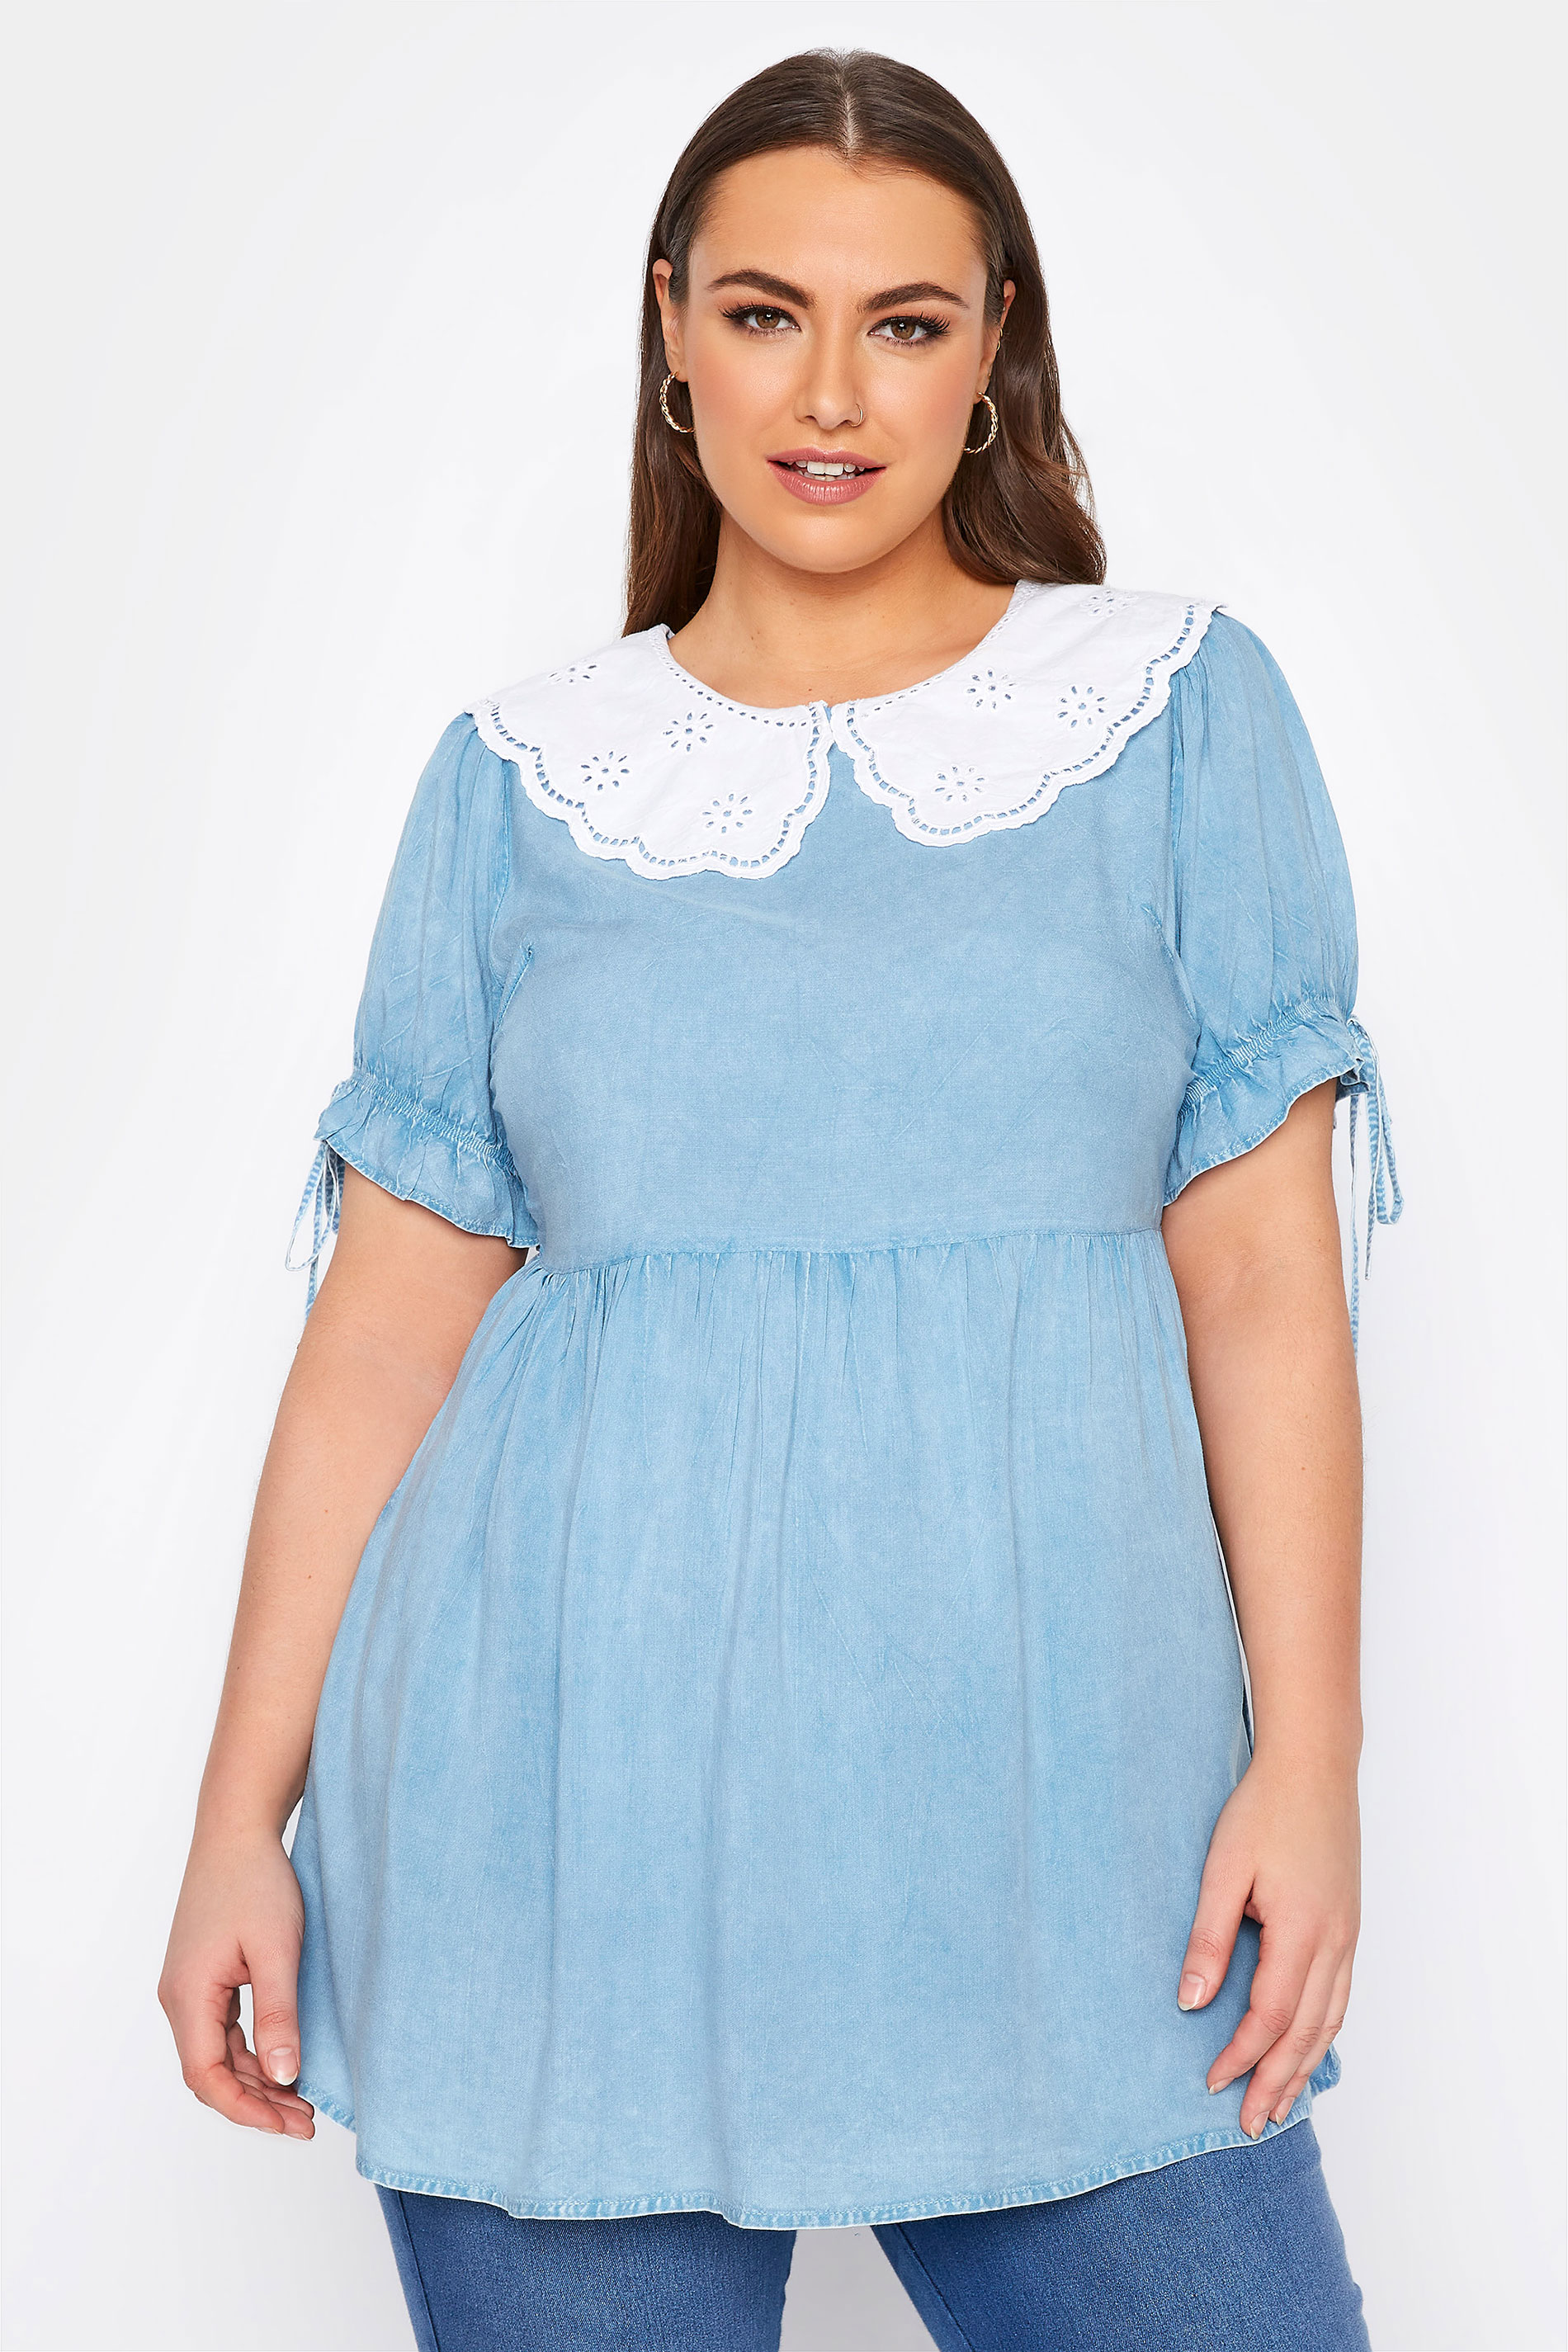 LIMITED COLLECTION Curve Blue Chambray Peplum Collar Top_A.jpg